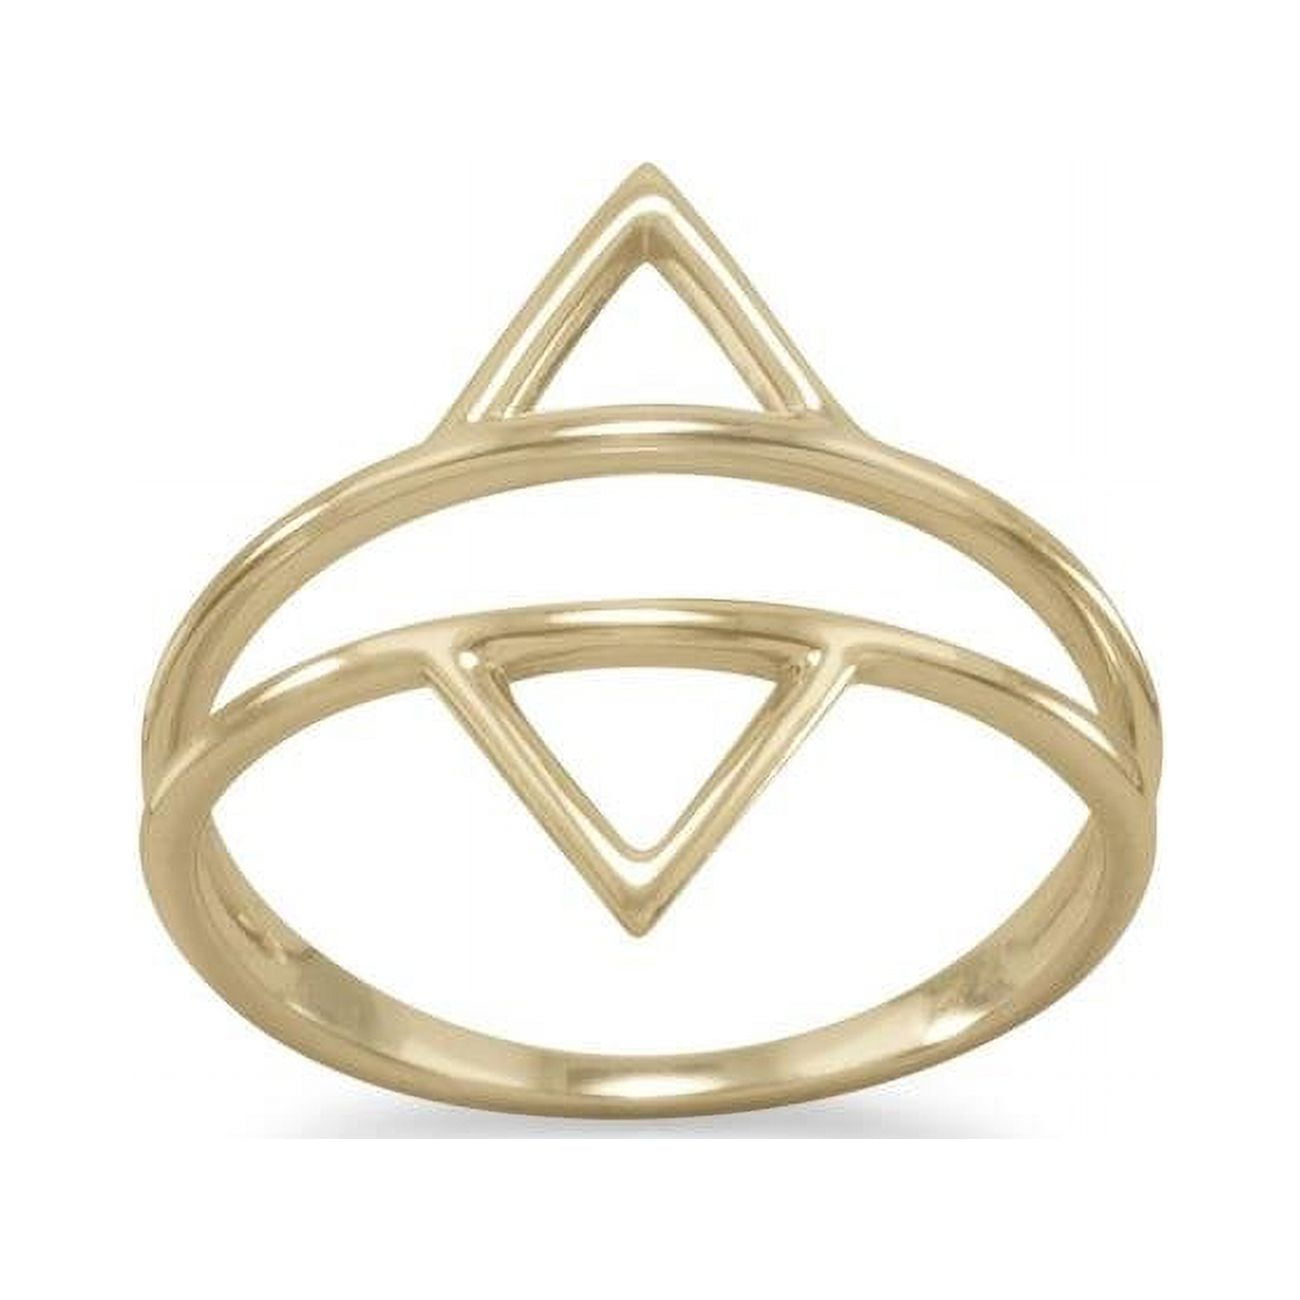 83697-6 14k Gold Plated Double Triangle Ring - Size 6